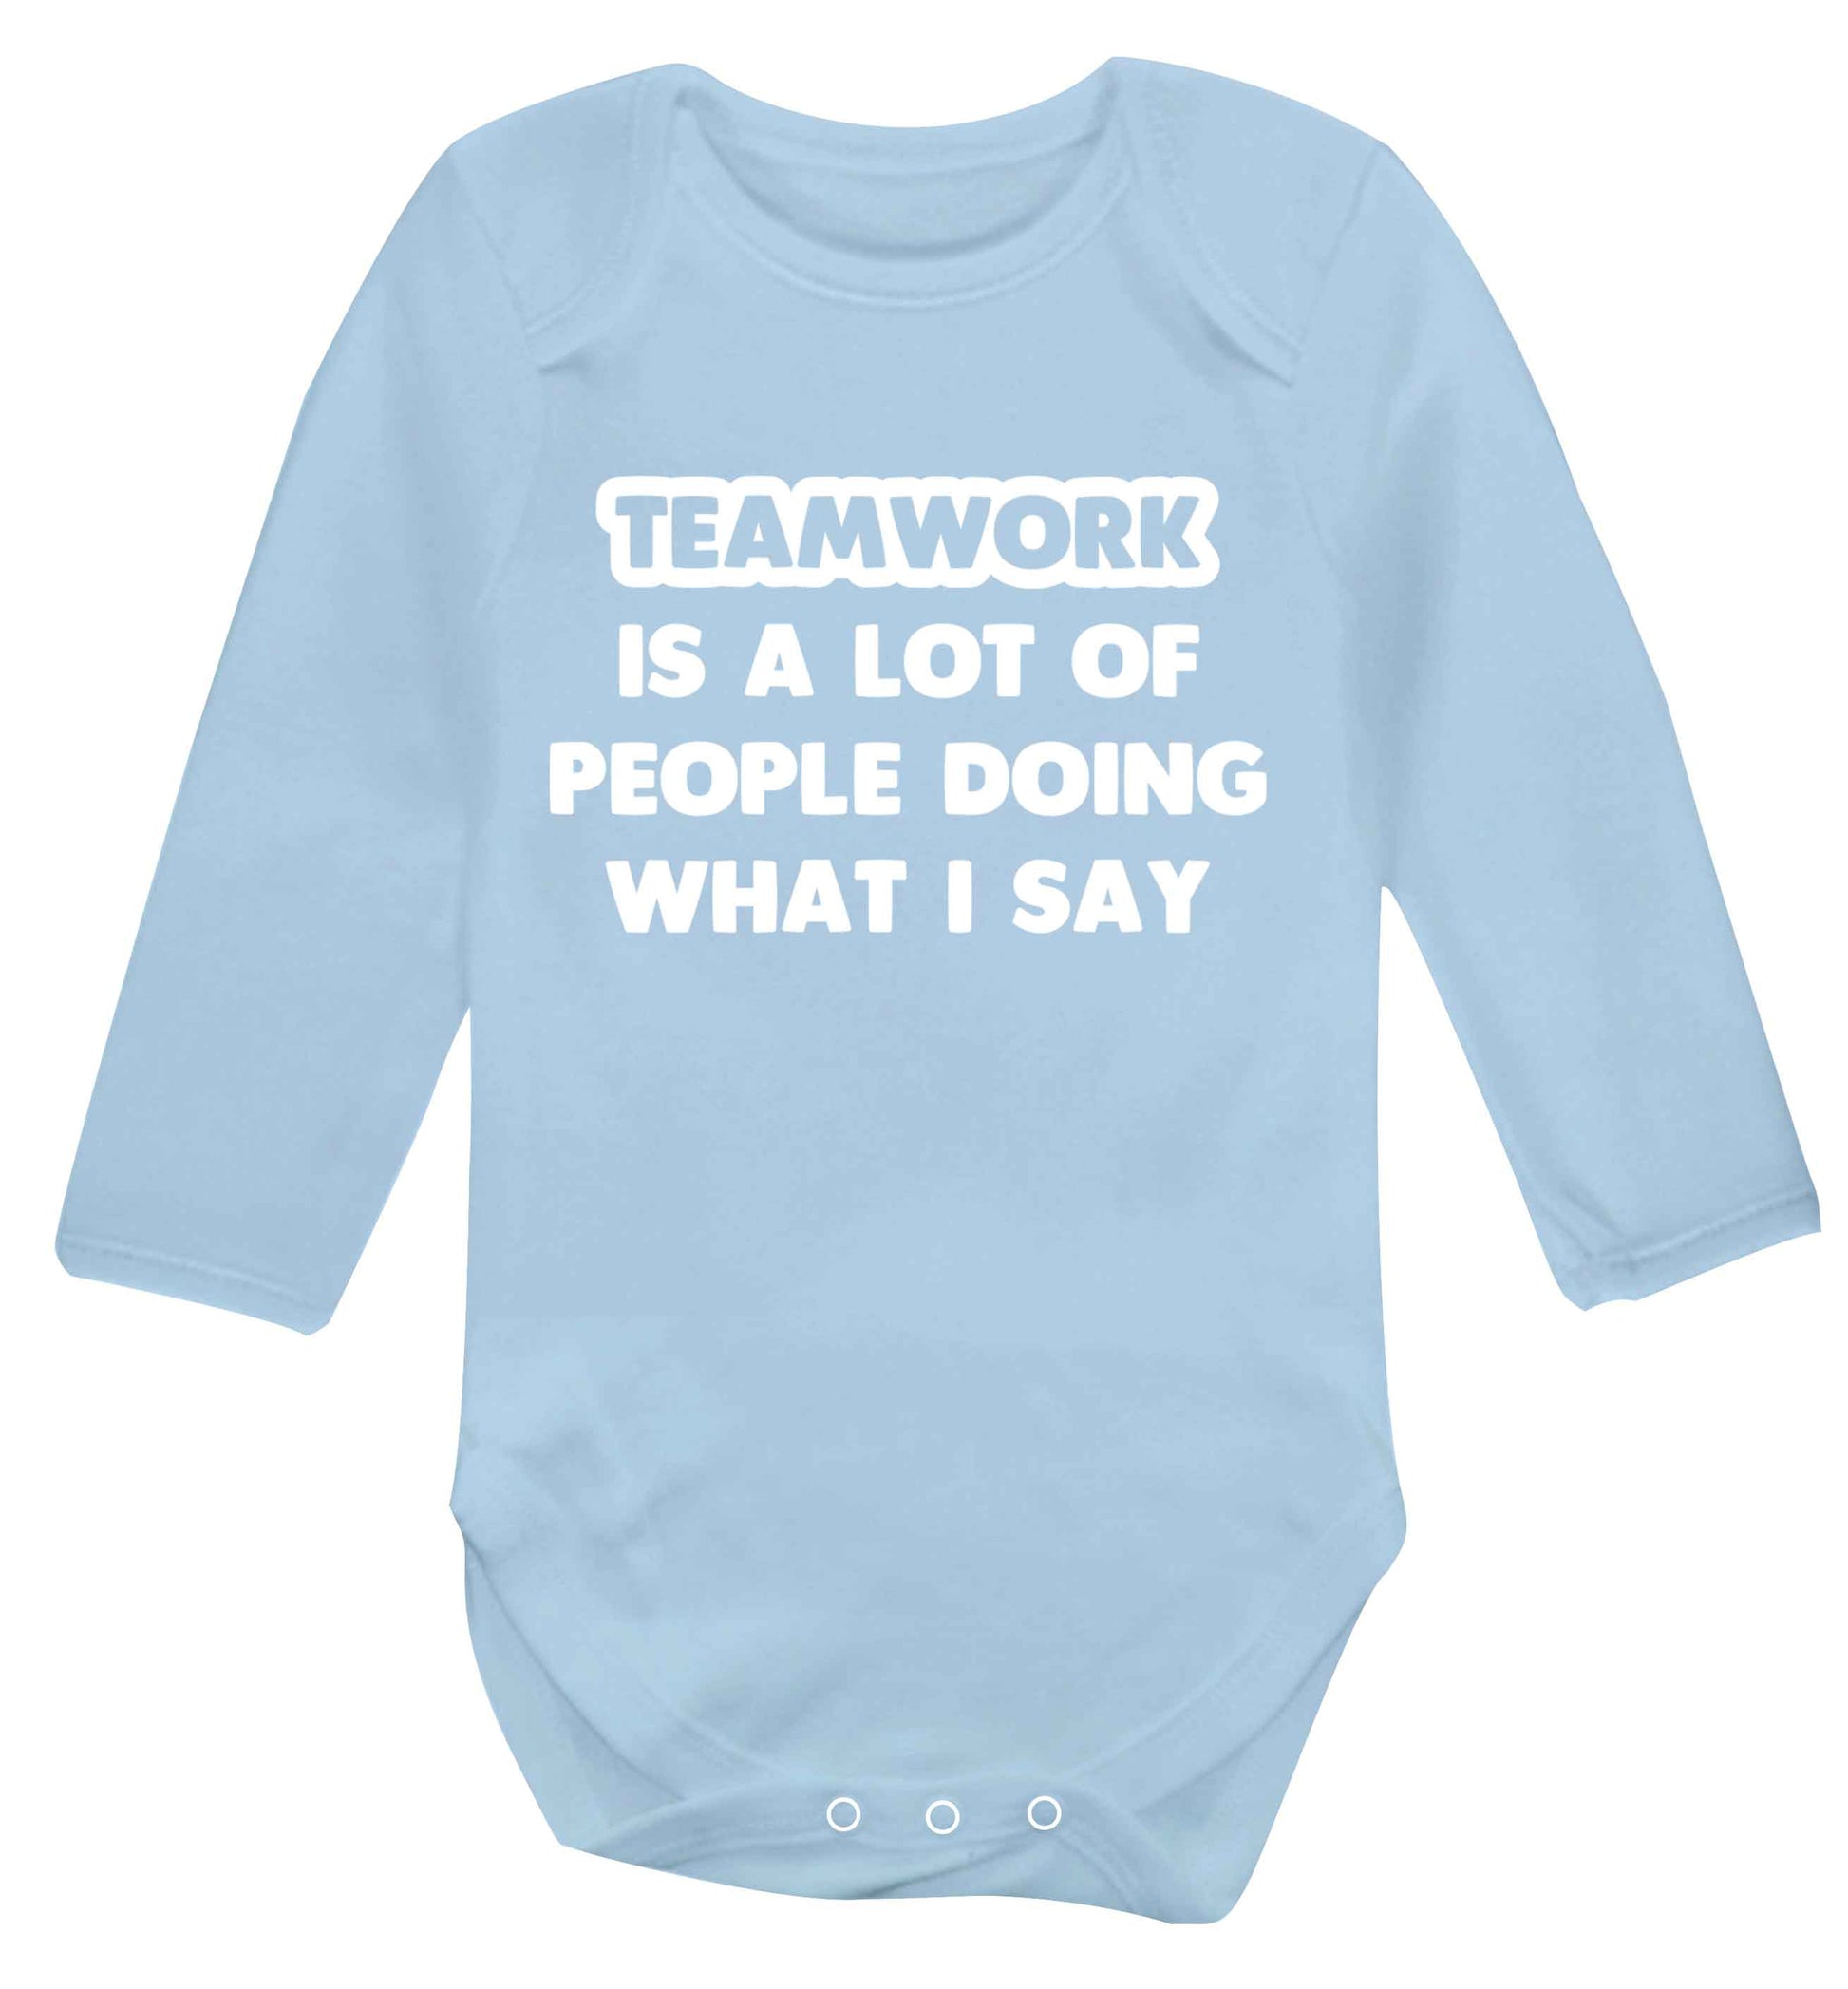 Teamwork is a lot of people doing what I say Baby Vest long sleeved pale blue 6-12 months